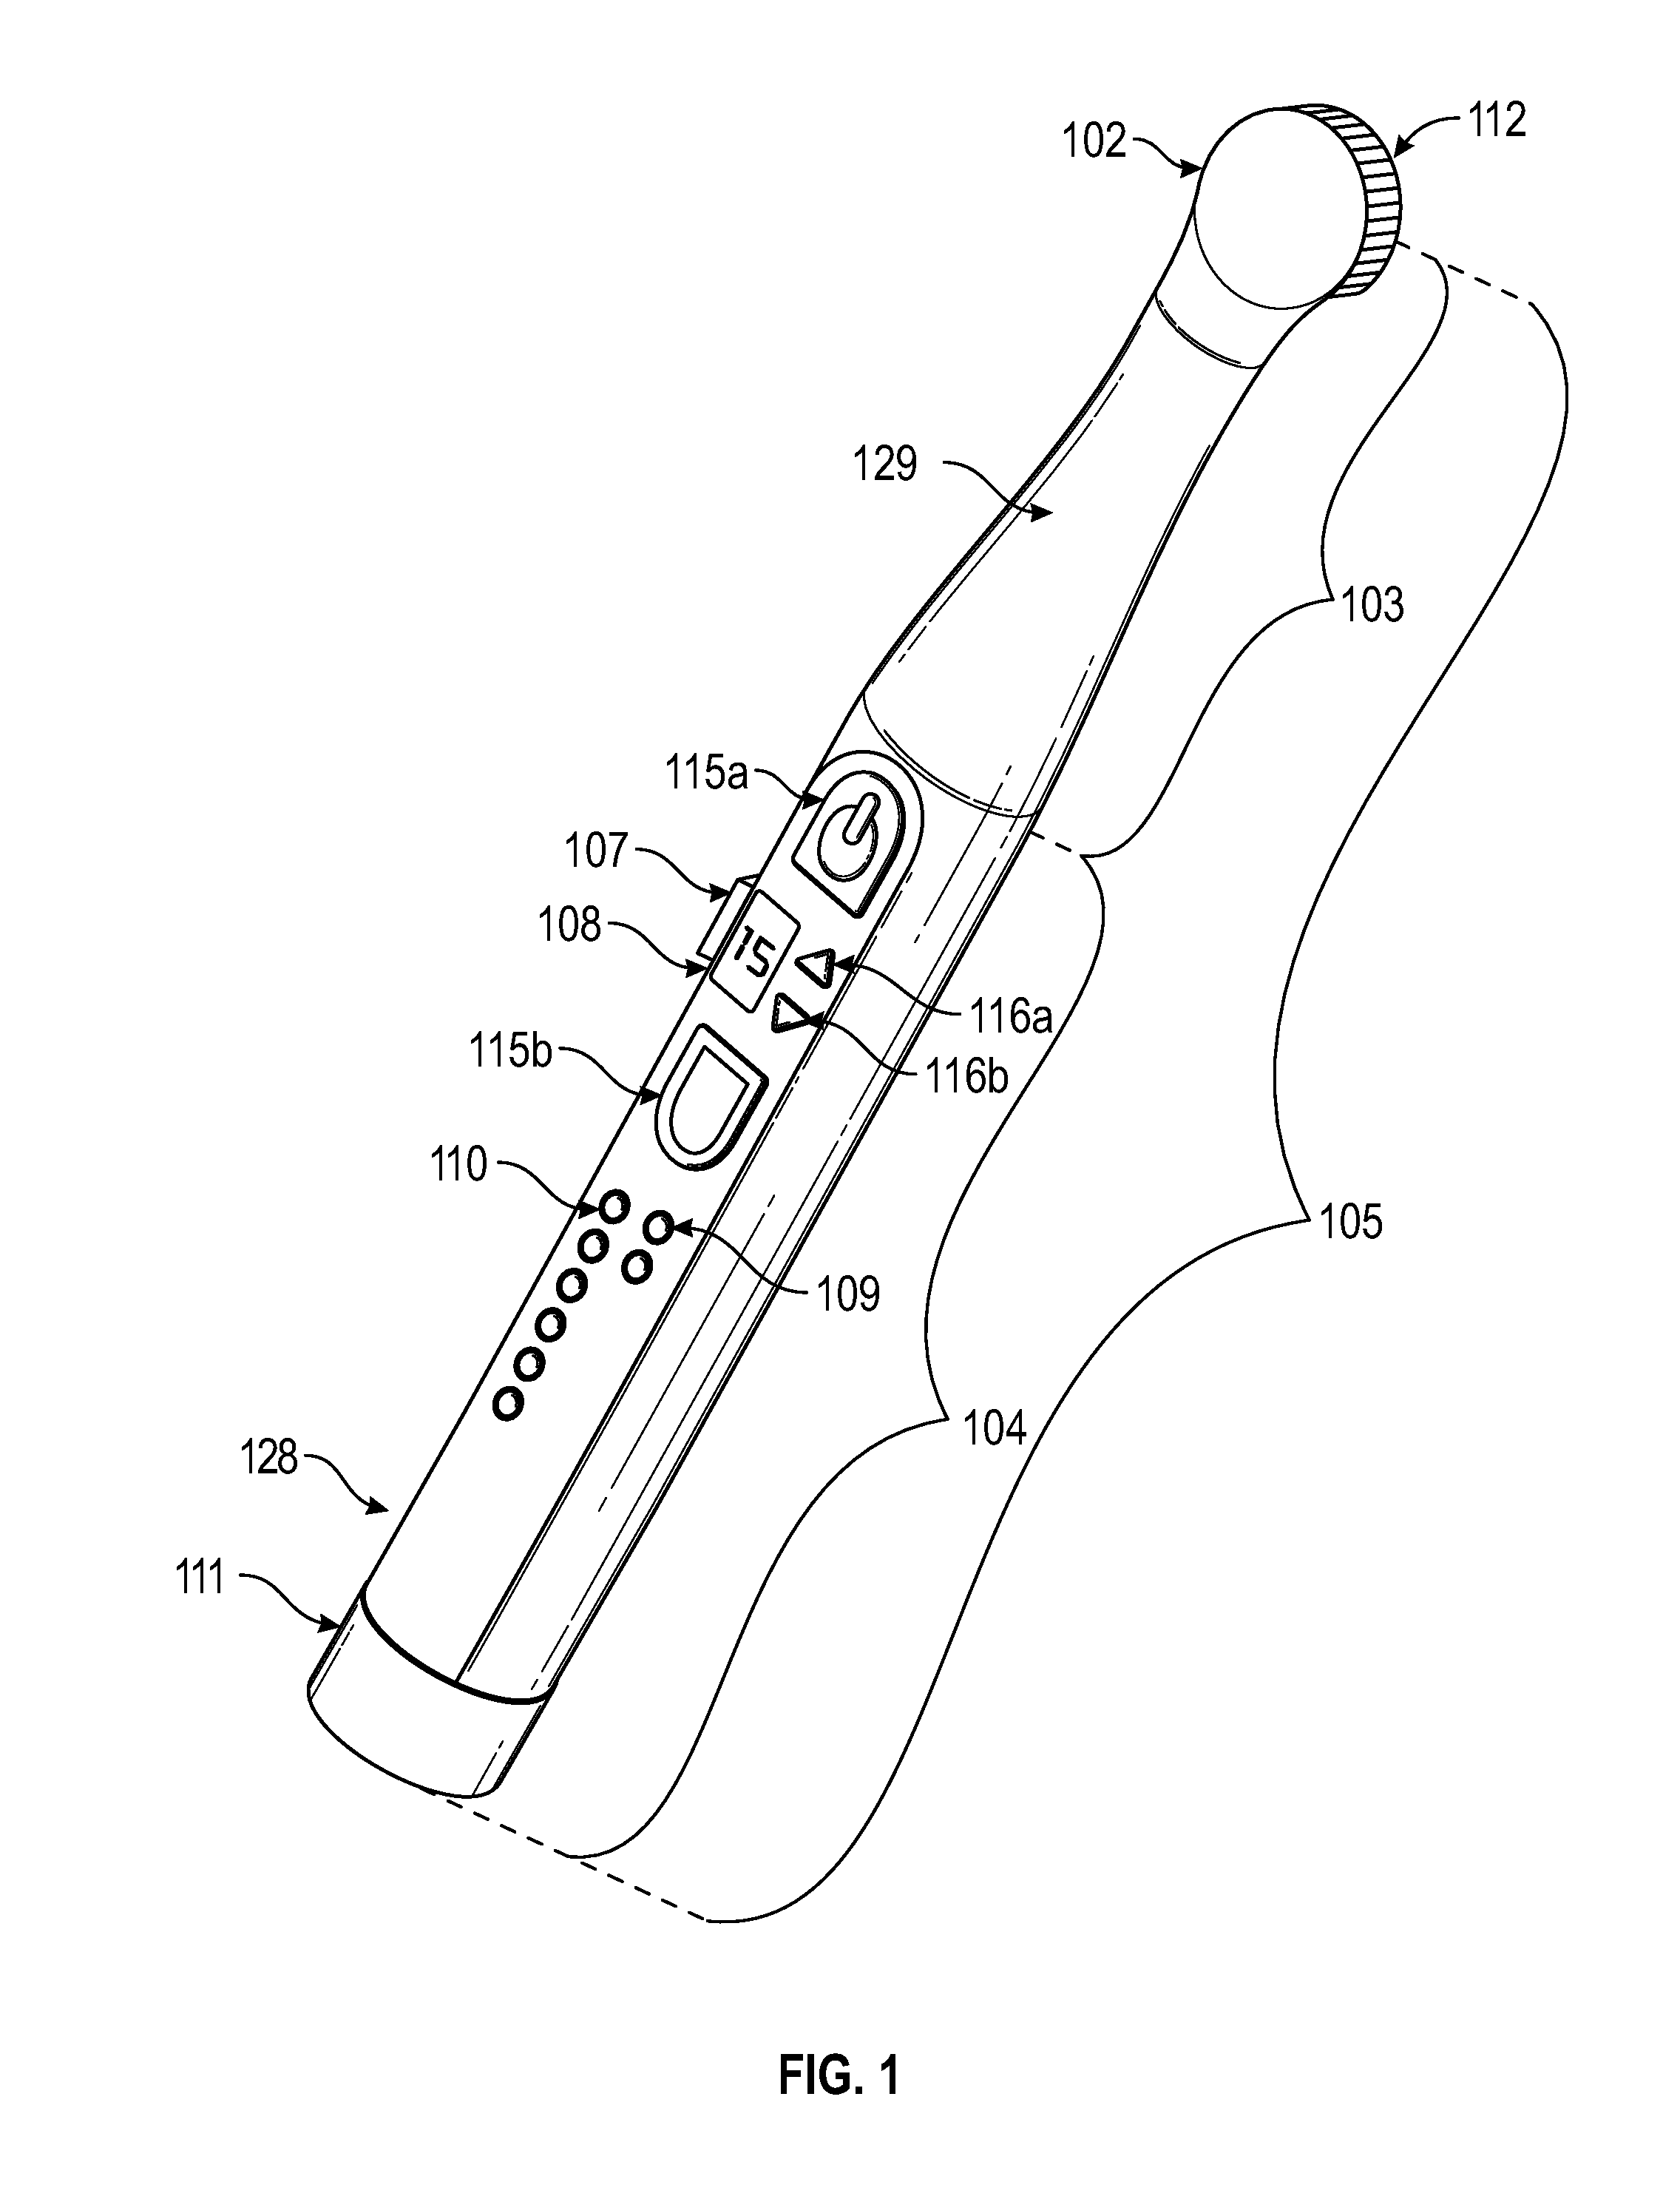 Pre and post anesthetic cooling device and method